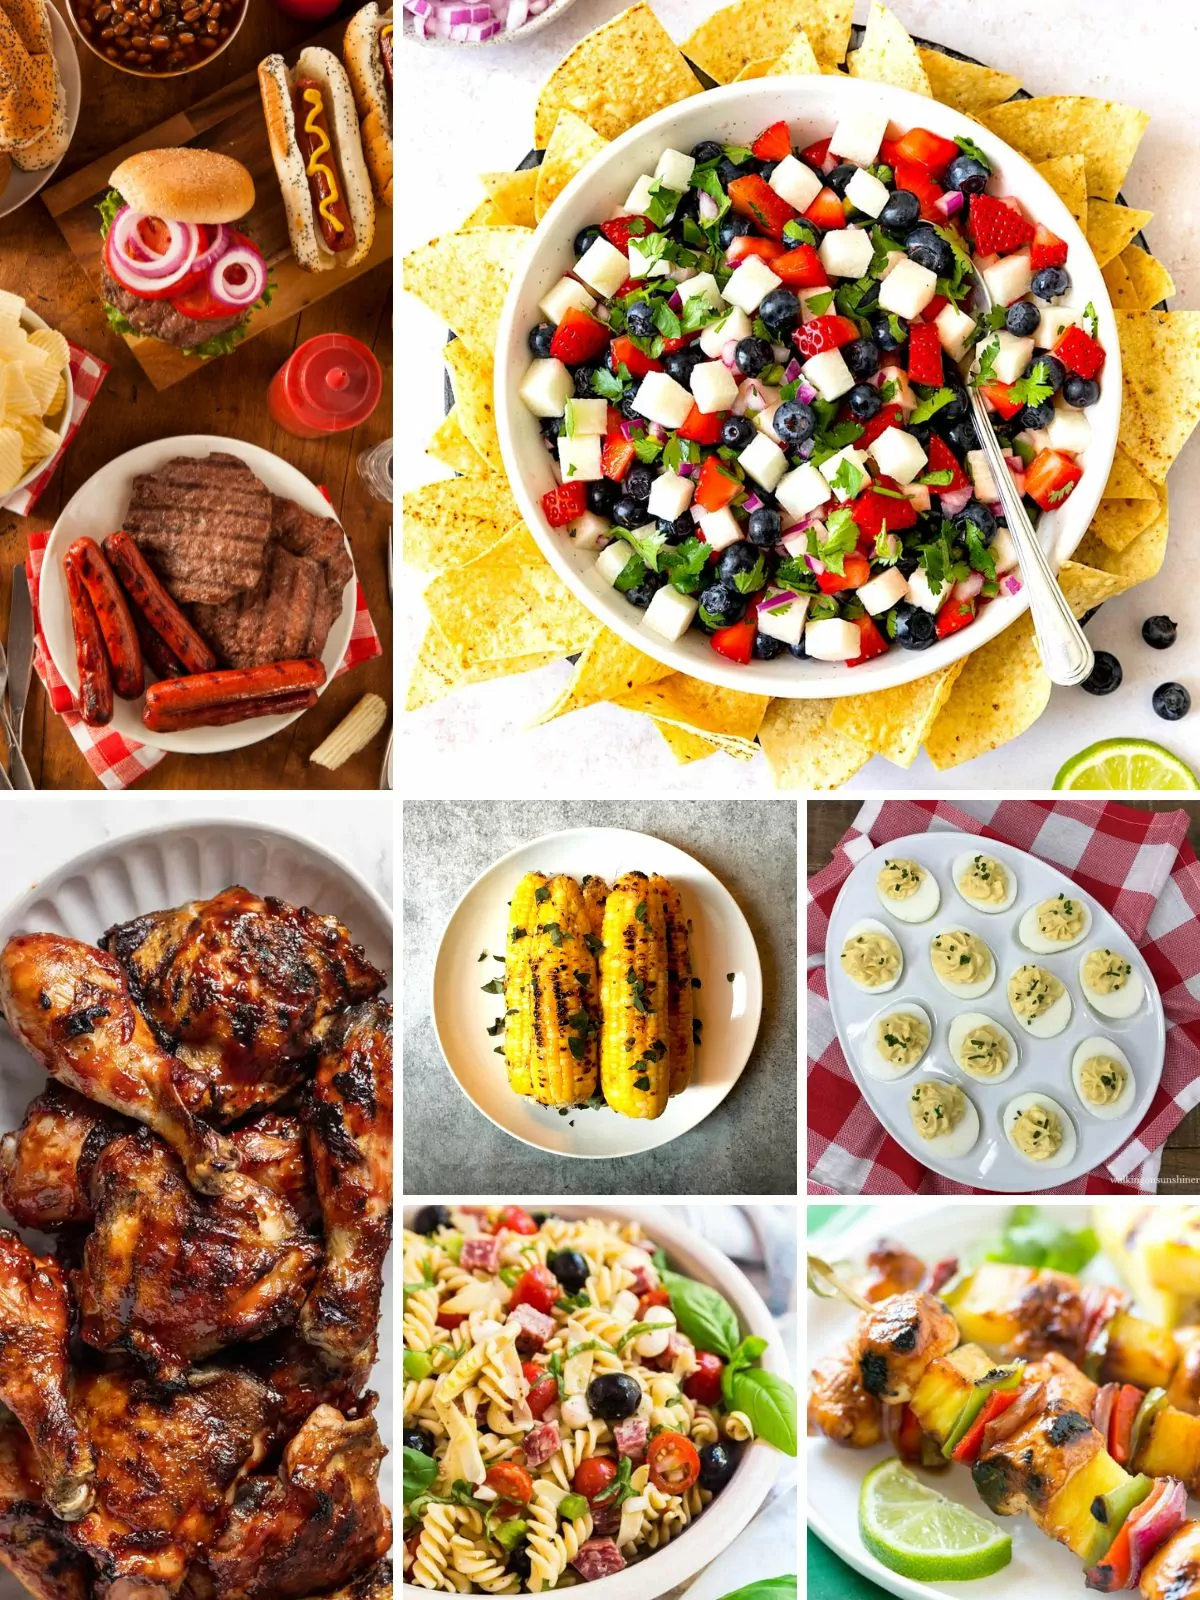 A colorful spread of festive American dishes for the 4th of July, including burgers, hot dogs, pasta salad, and grilled corn on the cob.